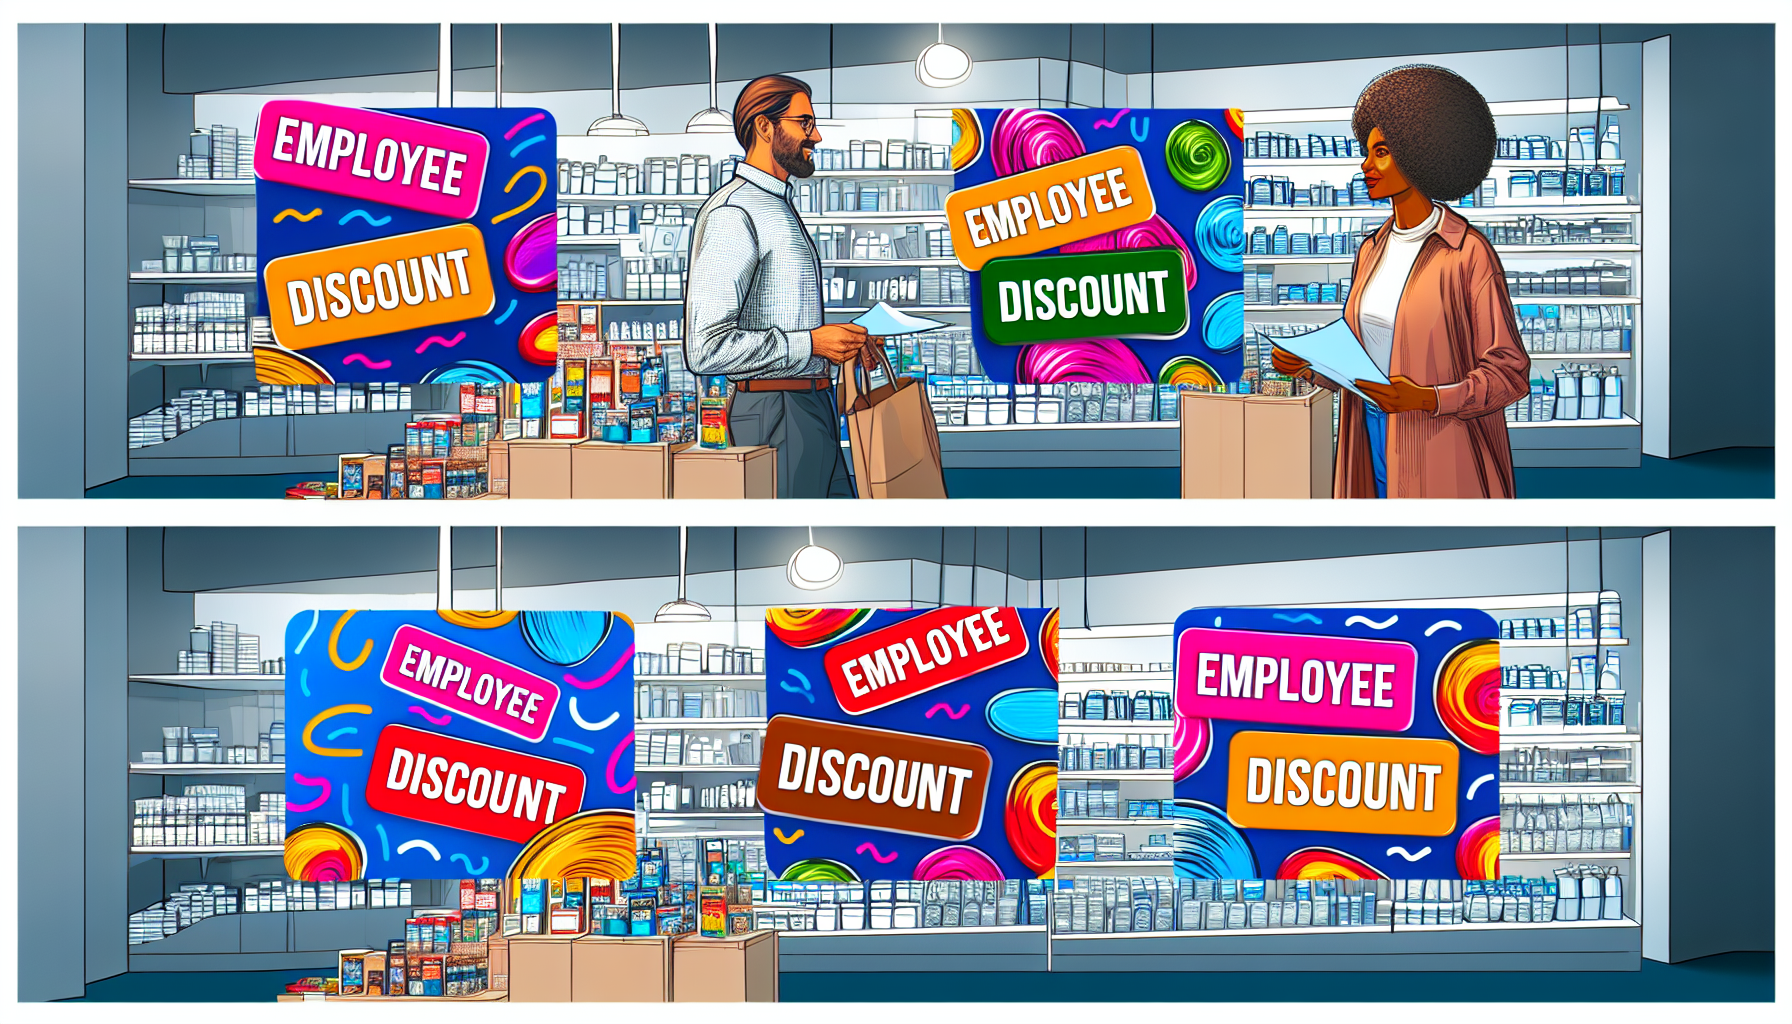 Local products and services with 'employee discount' labels